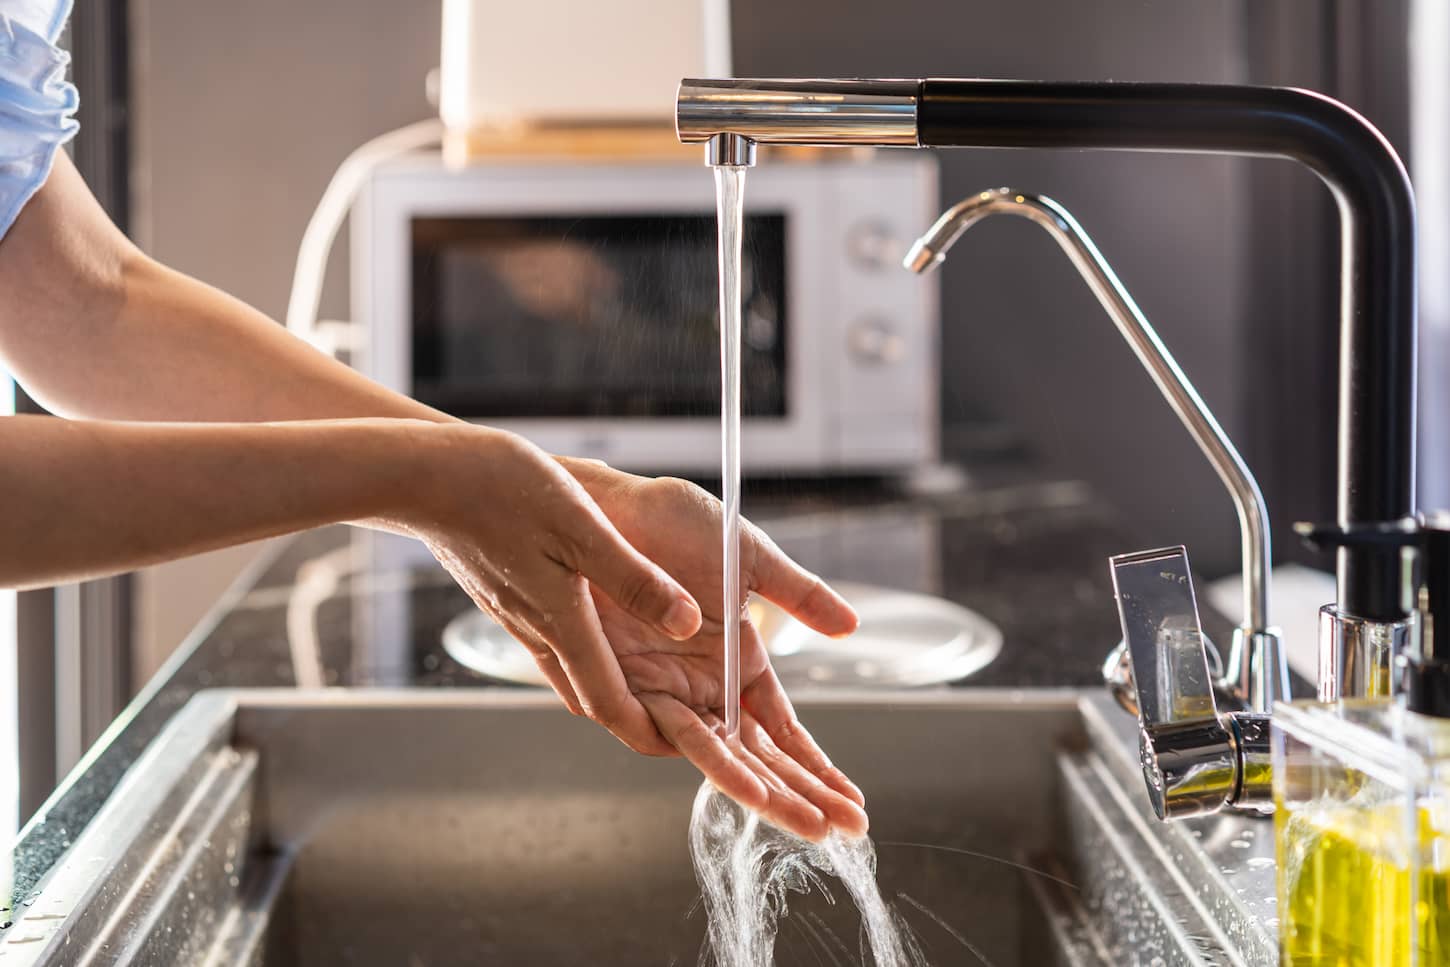 An image of a woman washing her hands in a running water in the kitchen sink at home.